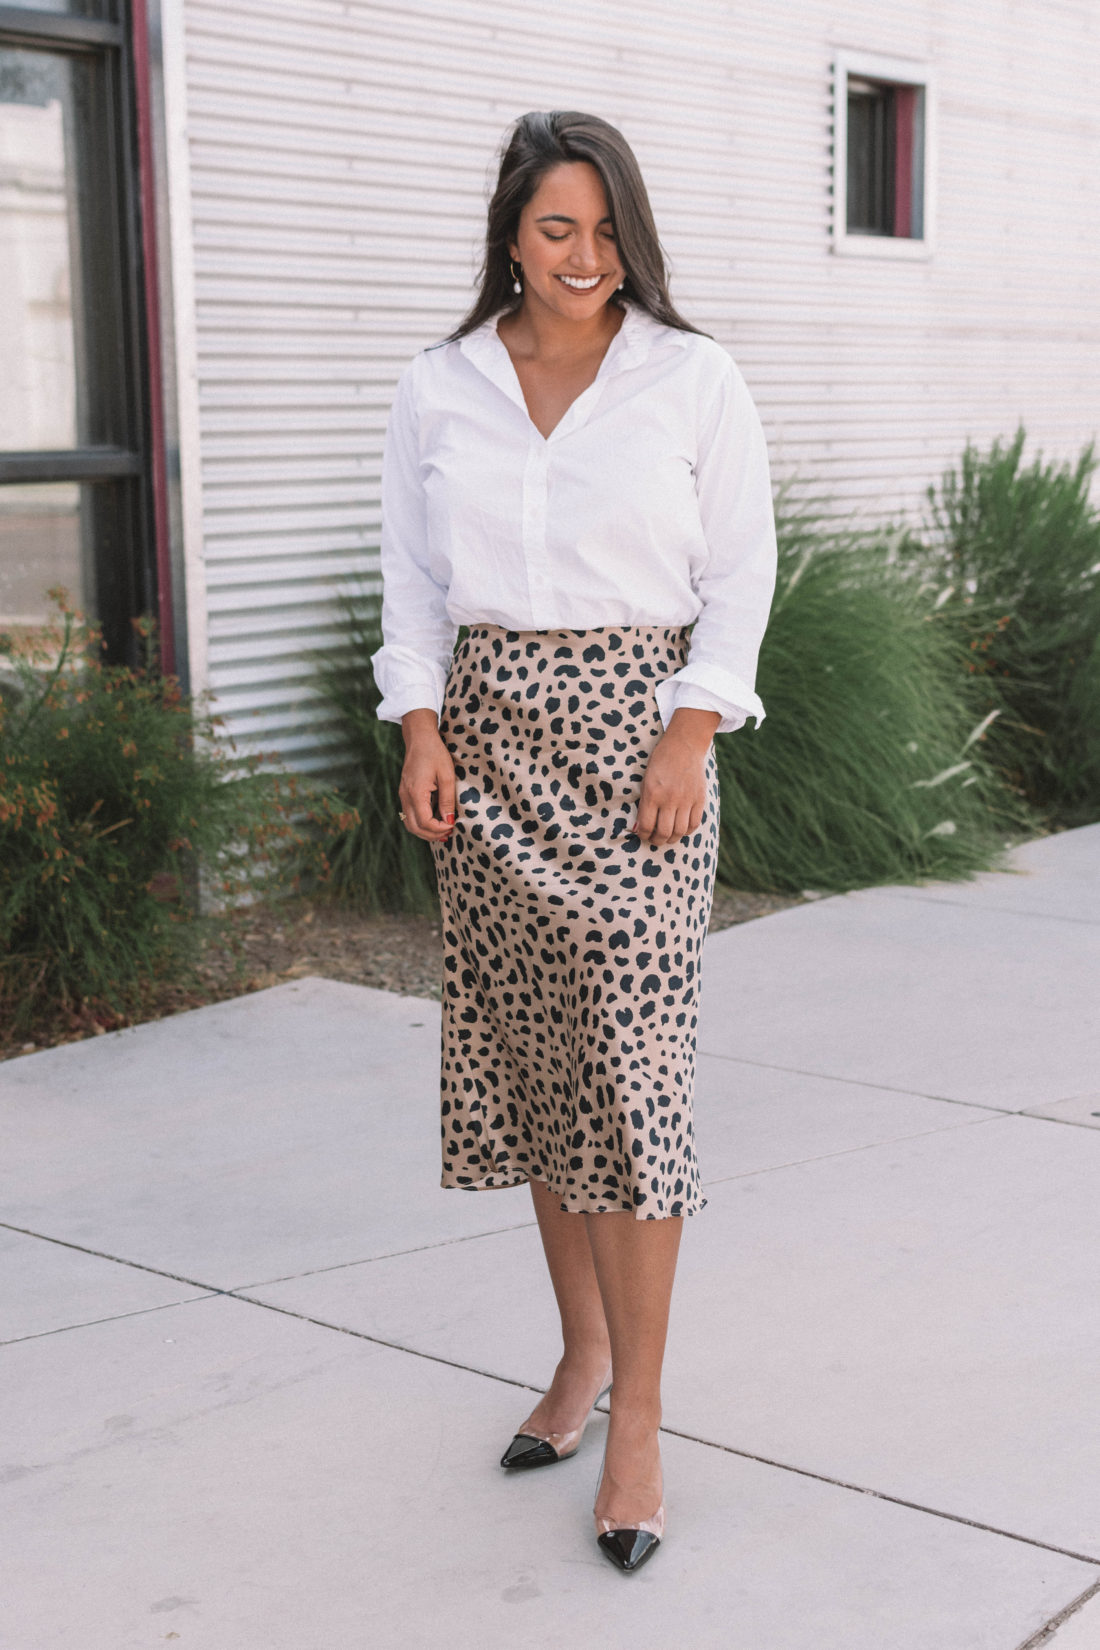 Yes, You Can Wear Leopard Print to Work too - Like This